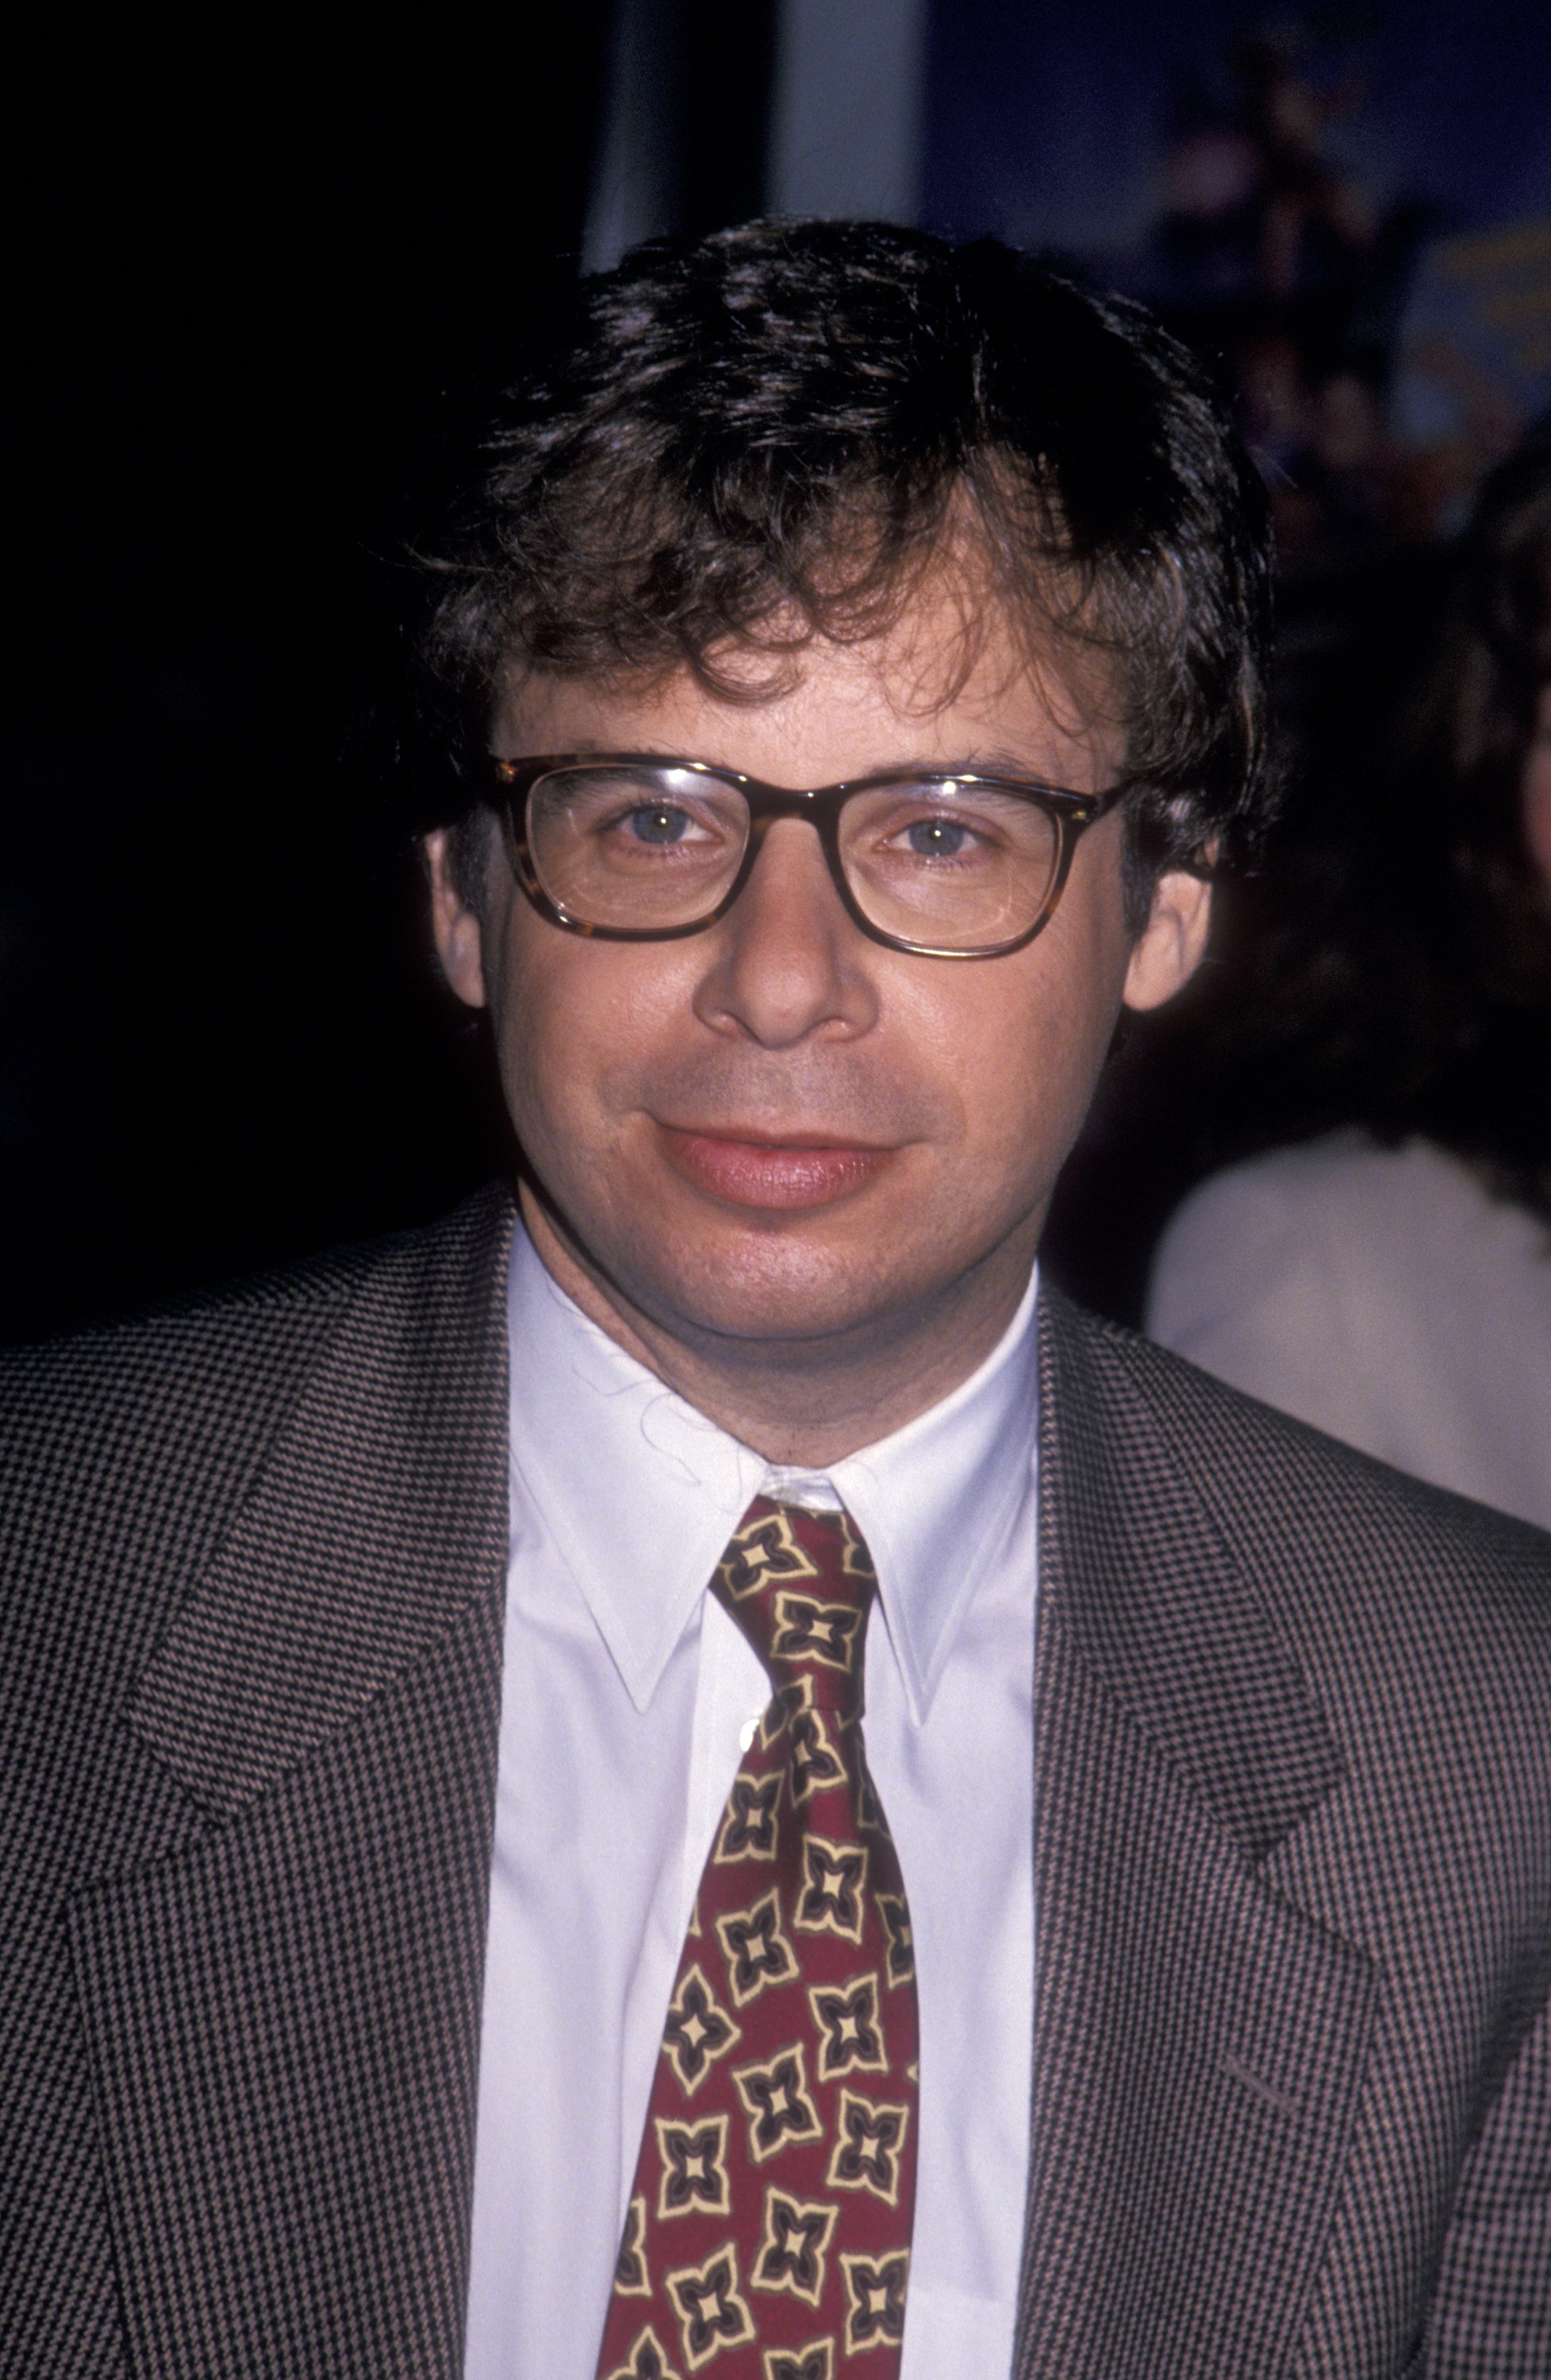 Rick Moranis attending the premiere of "The Flintstones" at the Ziegfeld Theater on May 23, 1994 in New York City. | Source: Getty Images